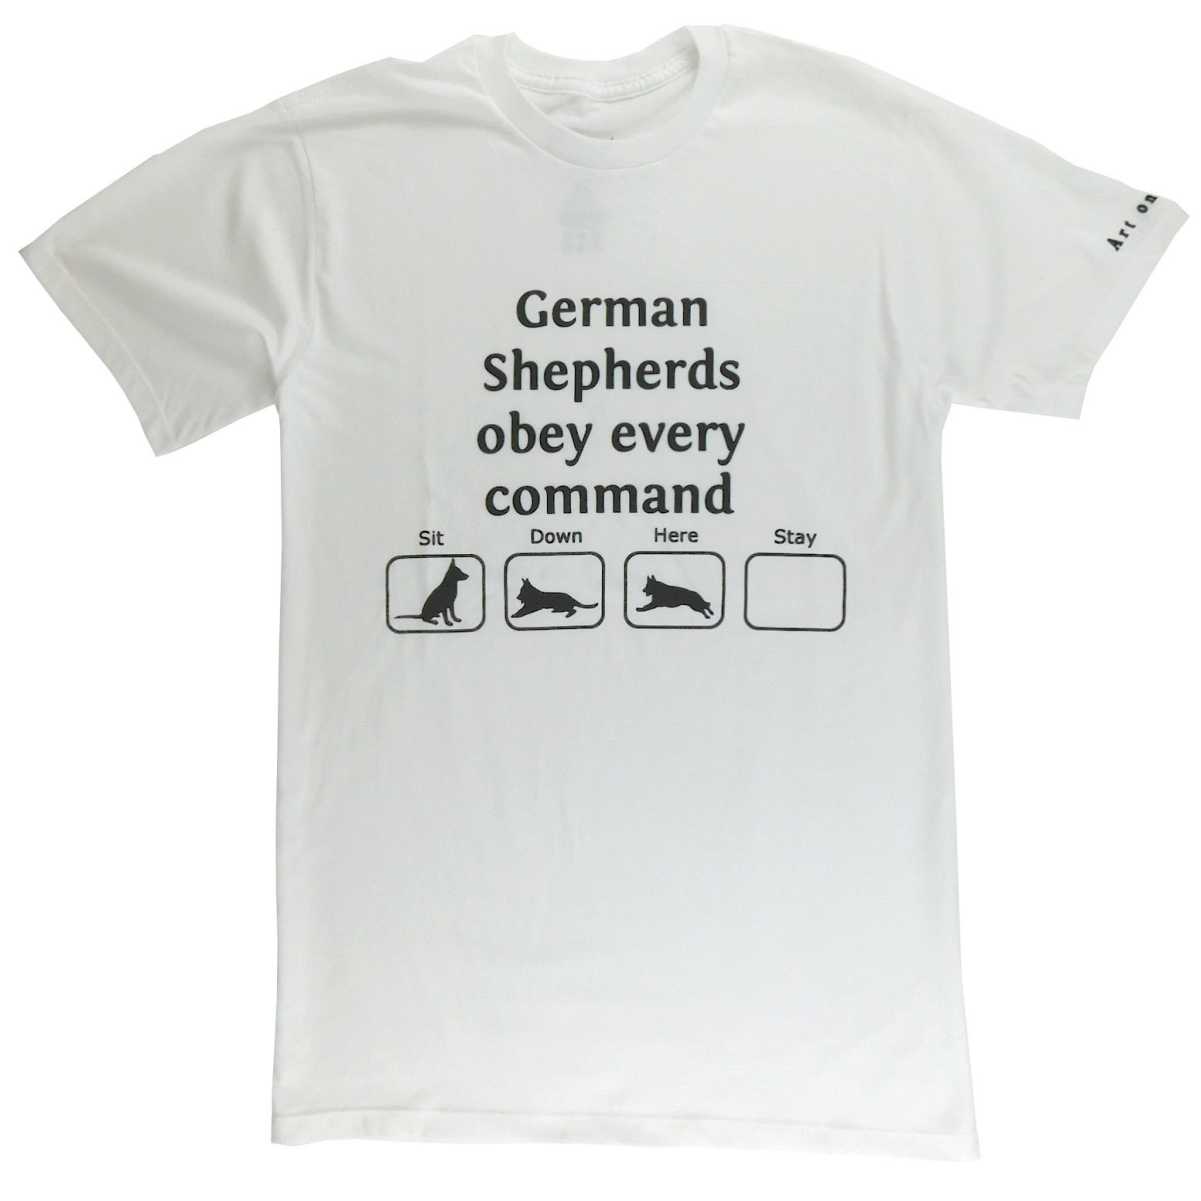 German Shepherds obey every command. Every? Another GSD skills t-shirt in White.